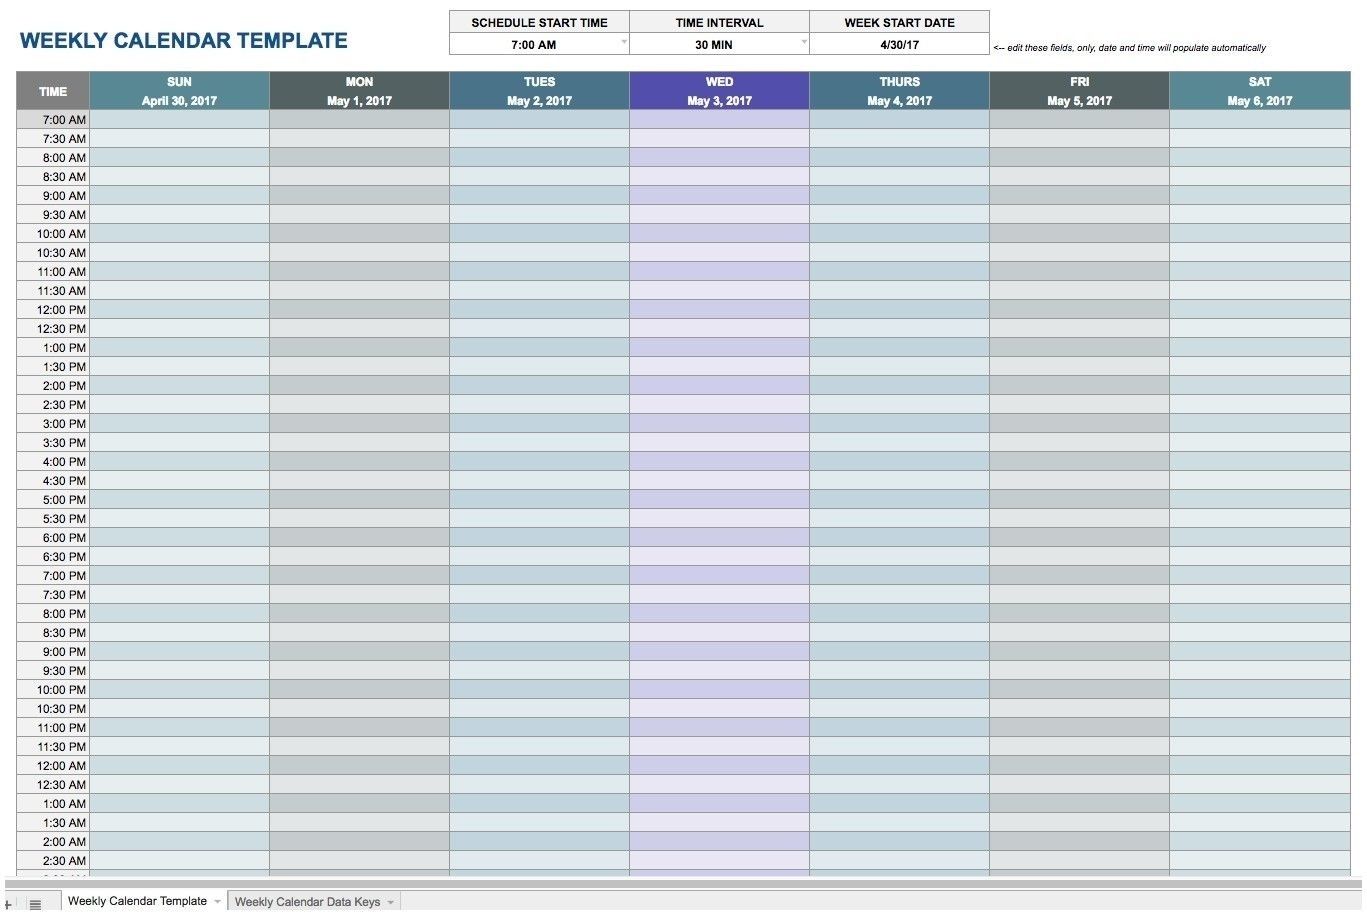 Daily Calendar Template Excel Appointment Schedule Template Weekly Calendar Template 30 Minute Increments